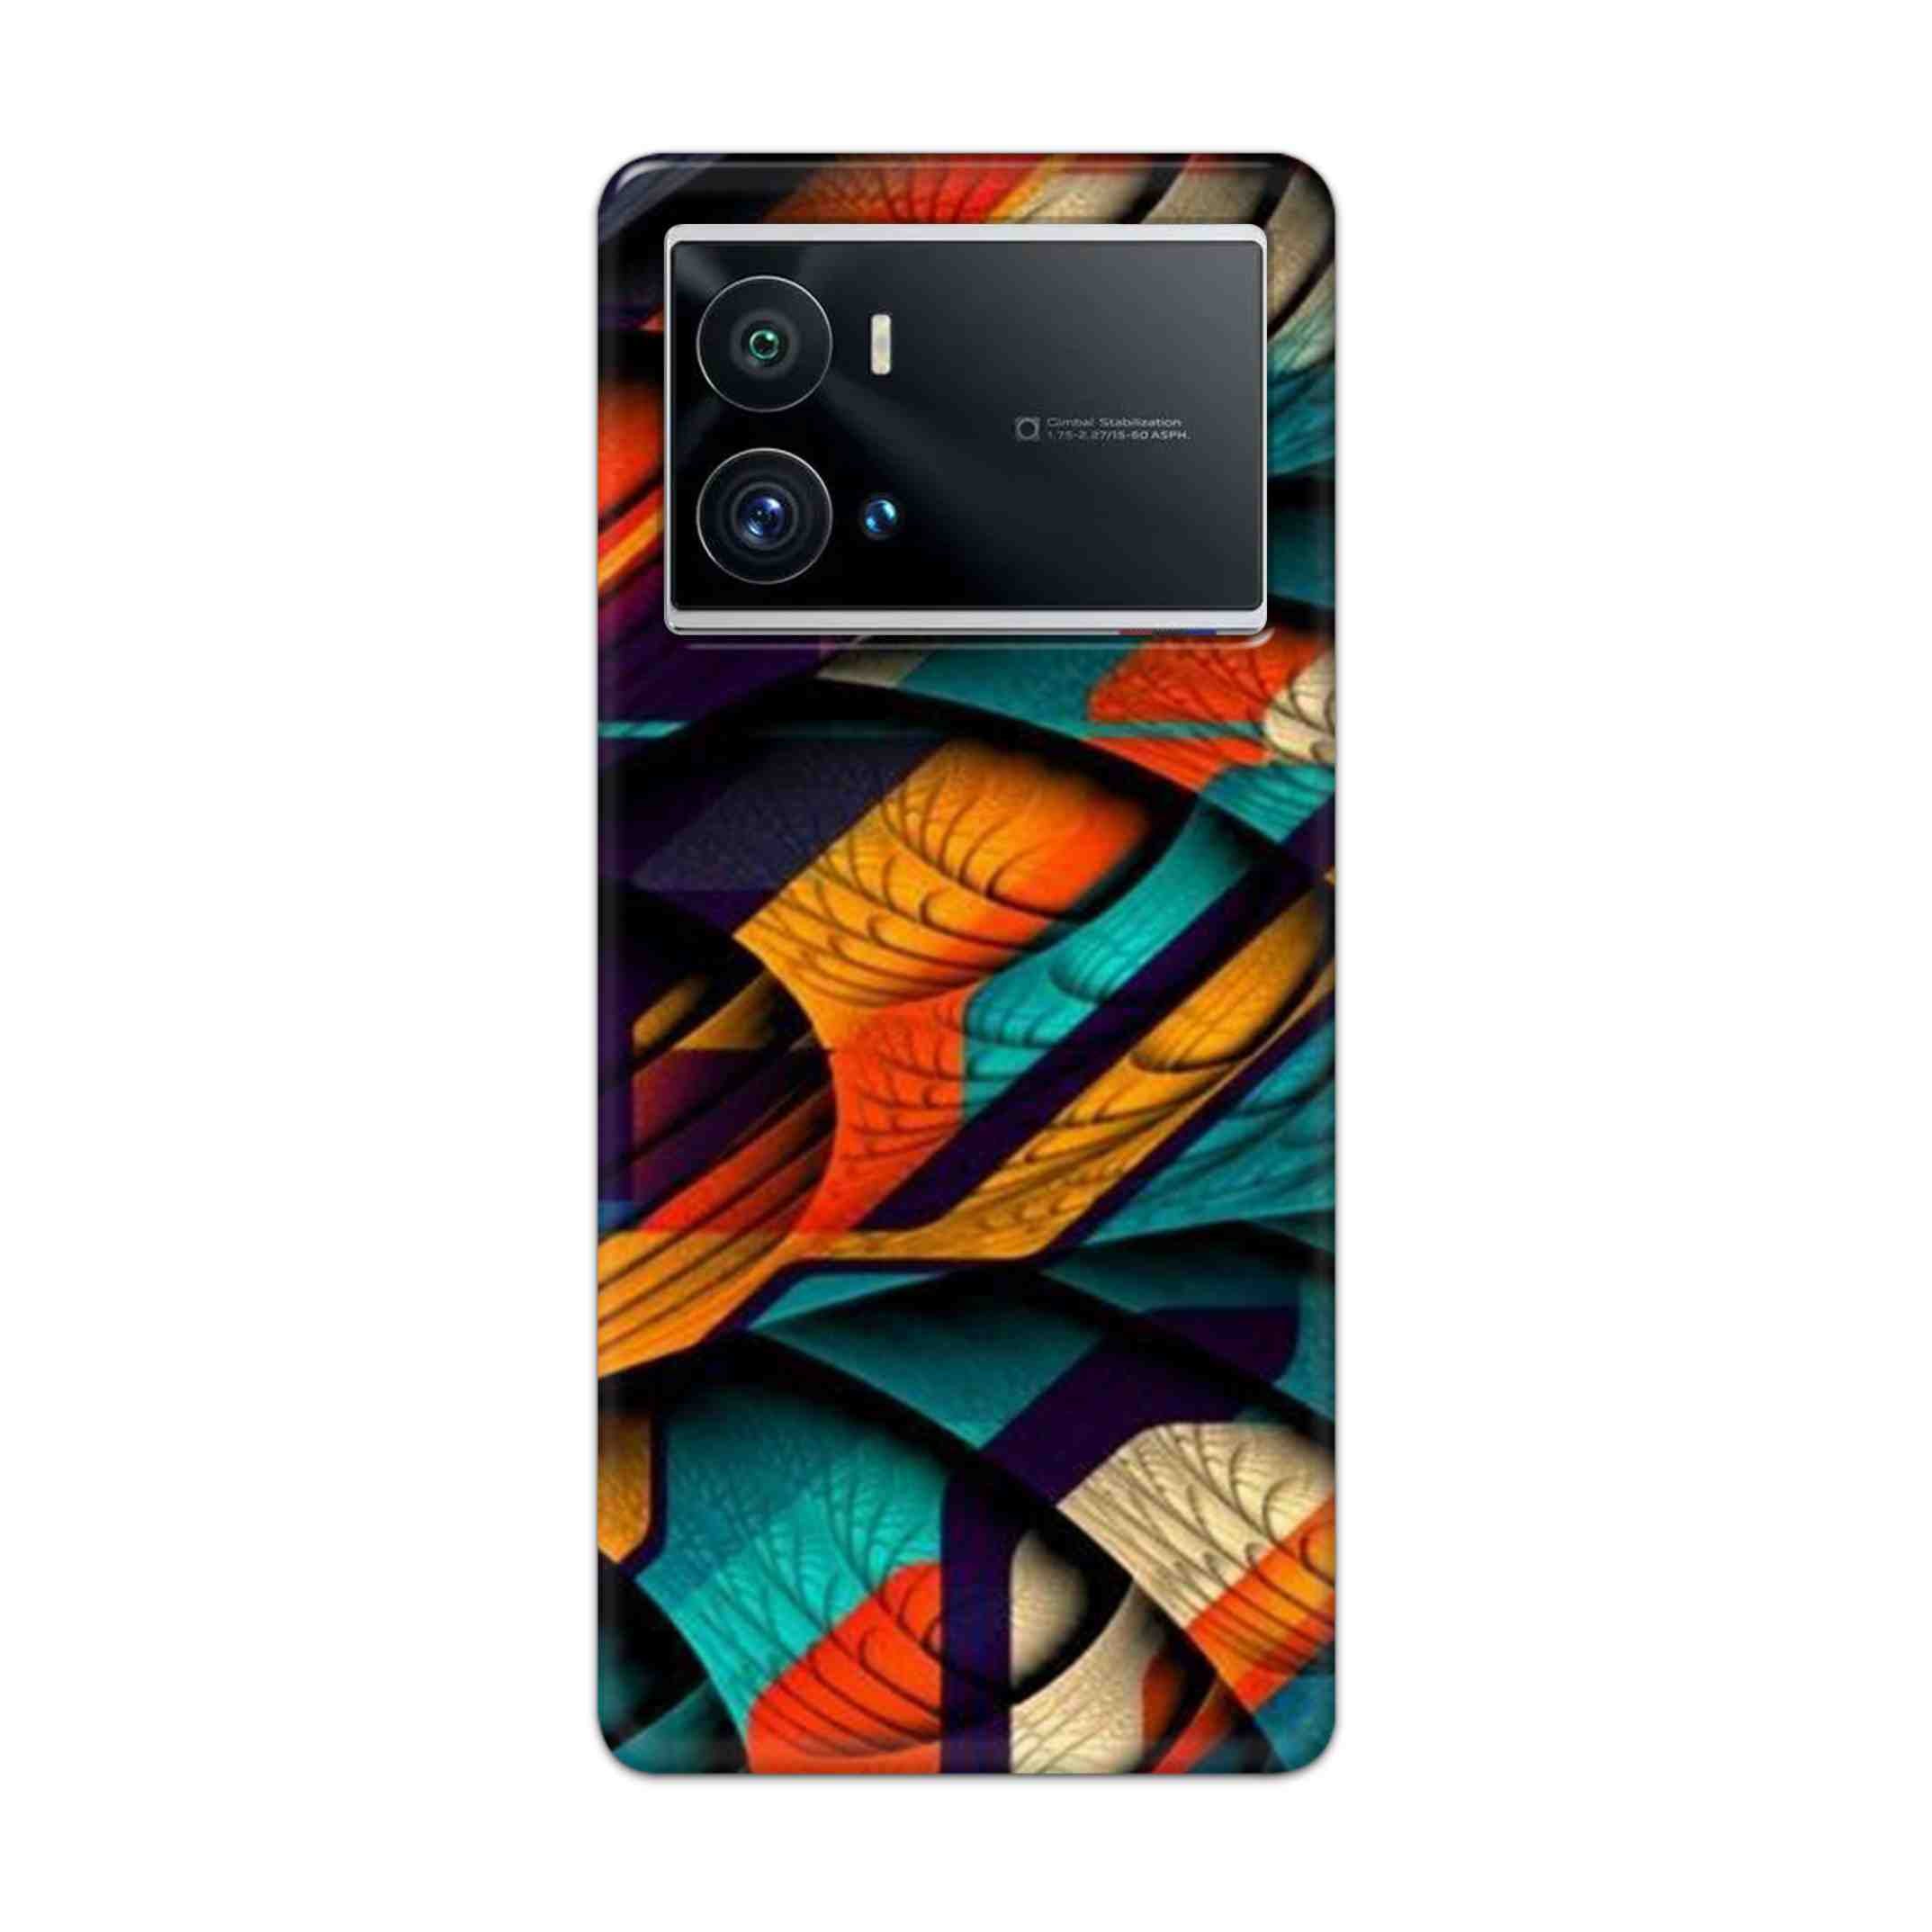 Buy Colour Abstract Hard Back Mobile Phone Case Cover For iQOO 9 Pro 5G Online